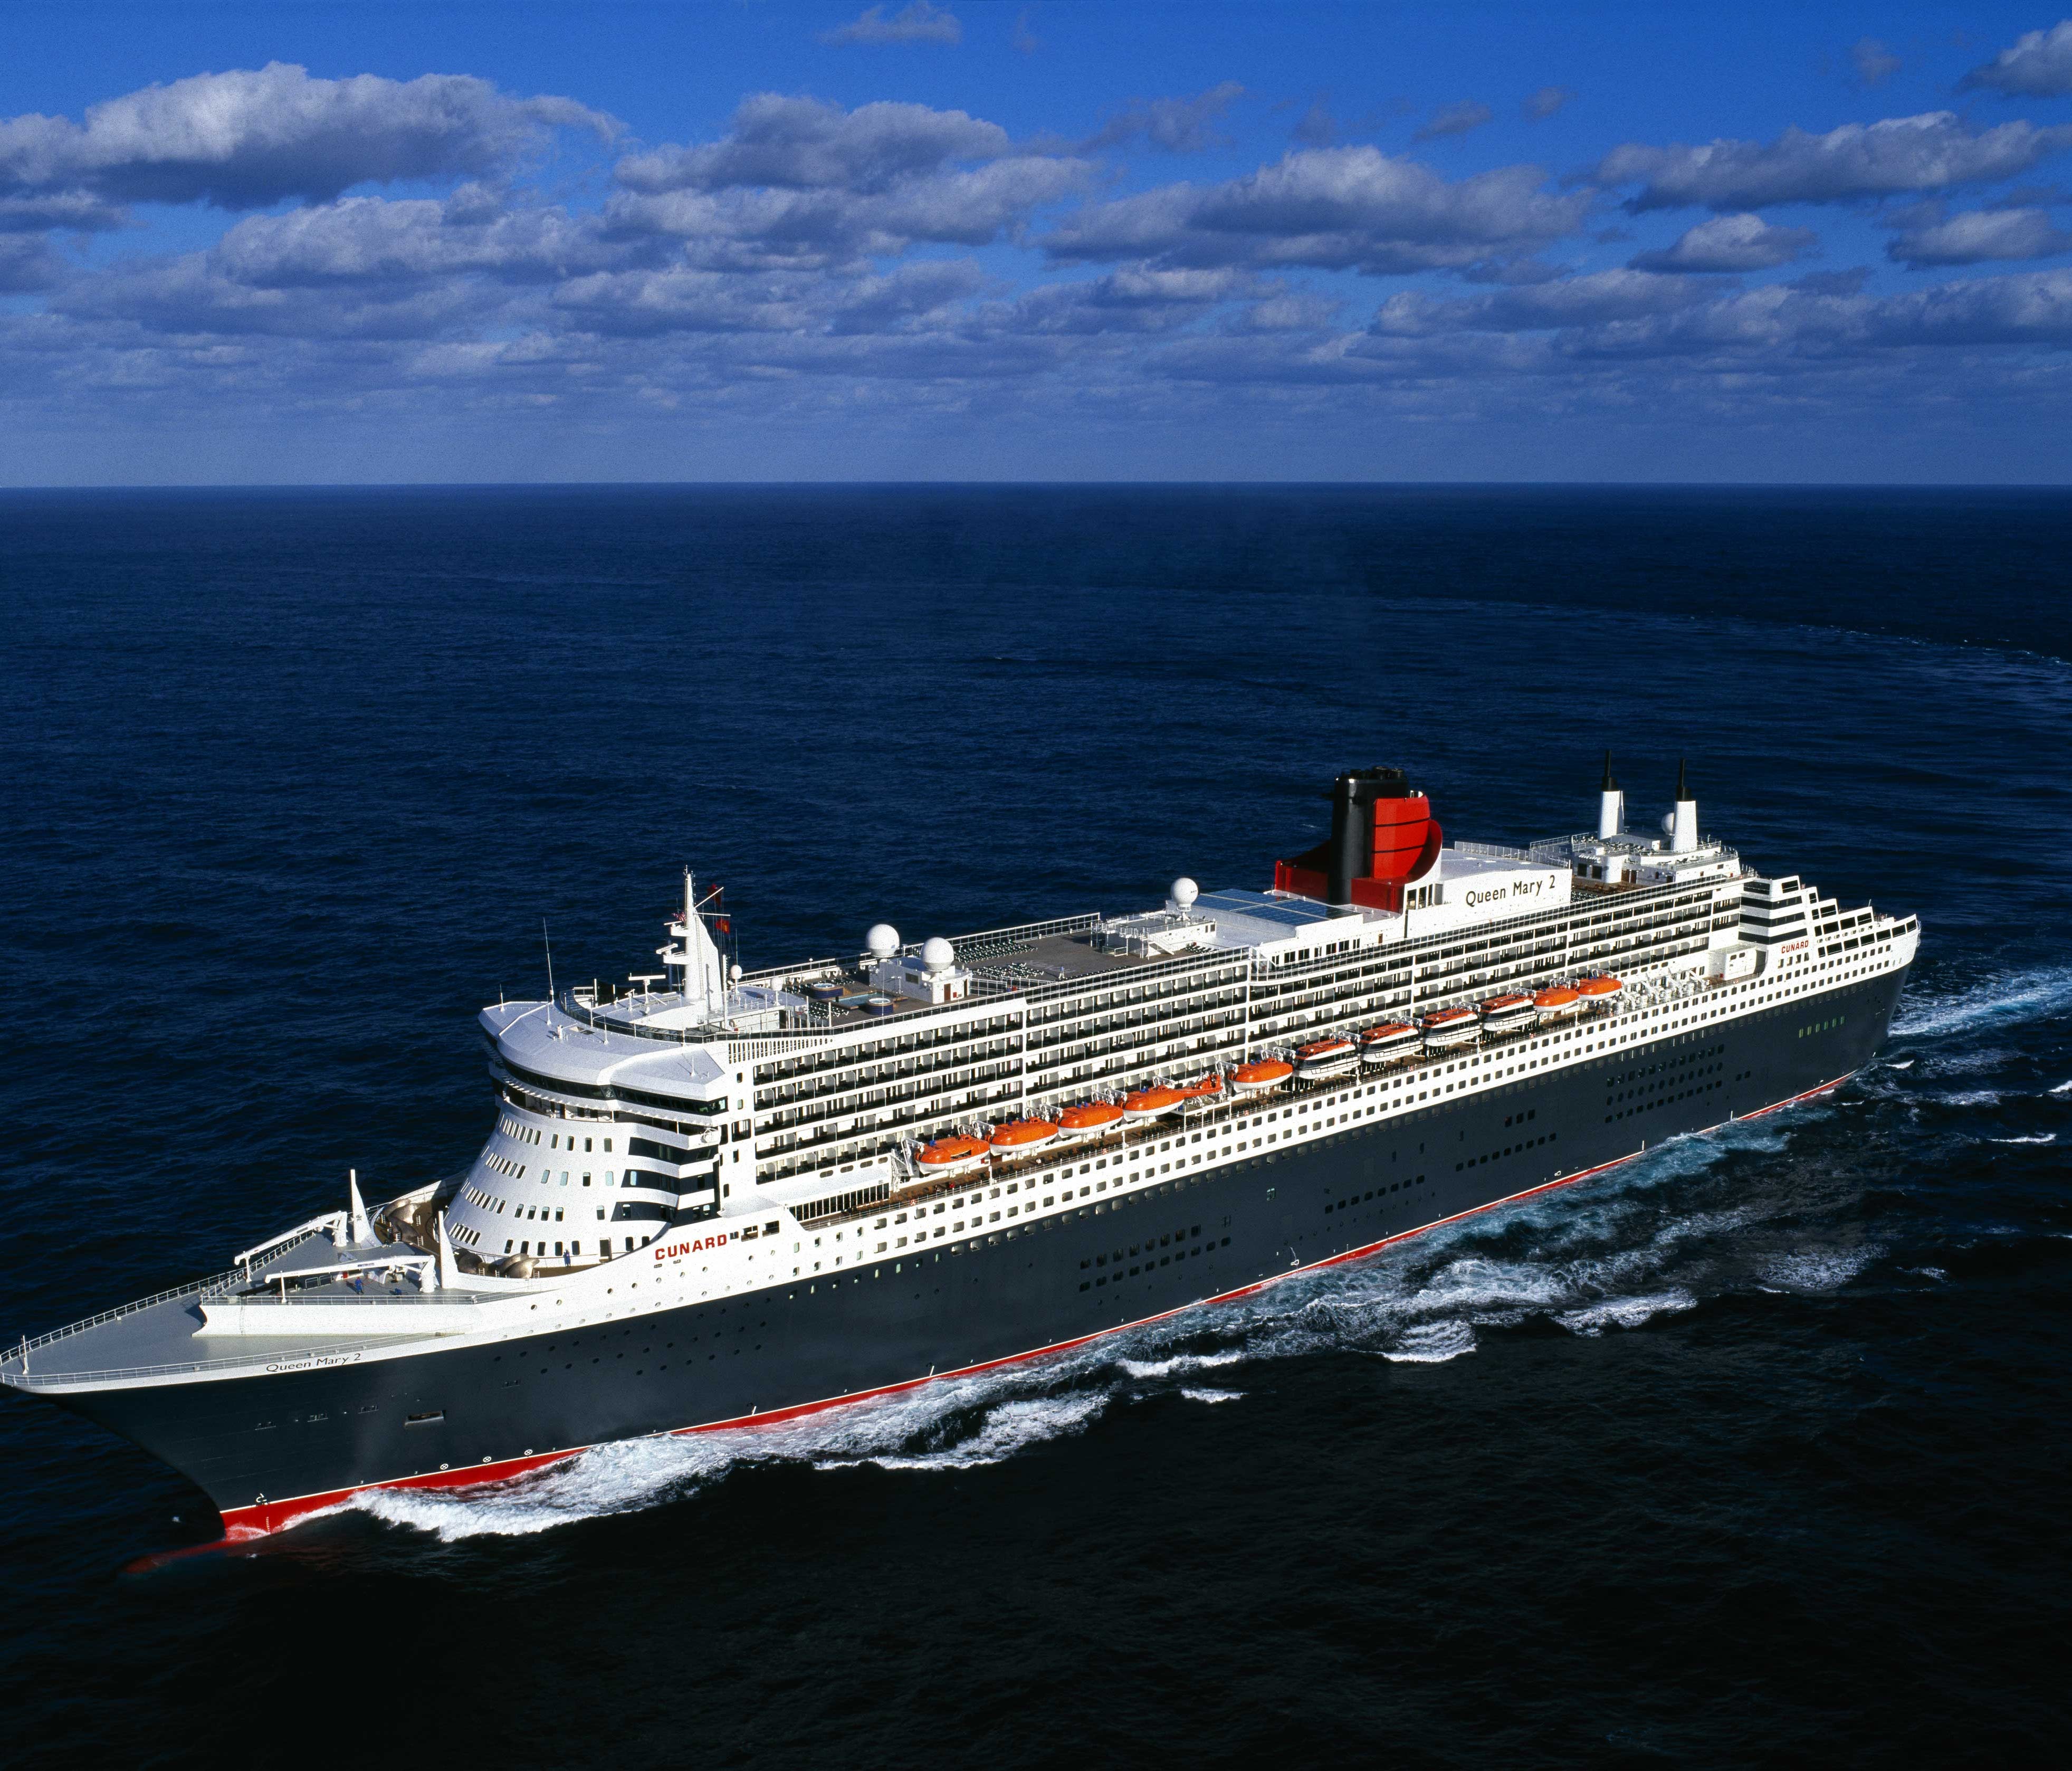 Cunard has continued the tradition of dark-hulled ships with its latest vessels. Here, the line's current flagship, Queen Mary 2.